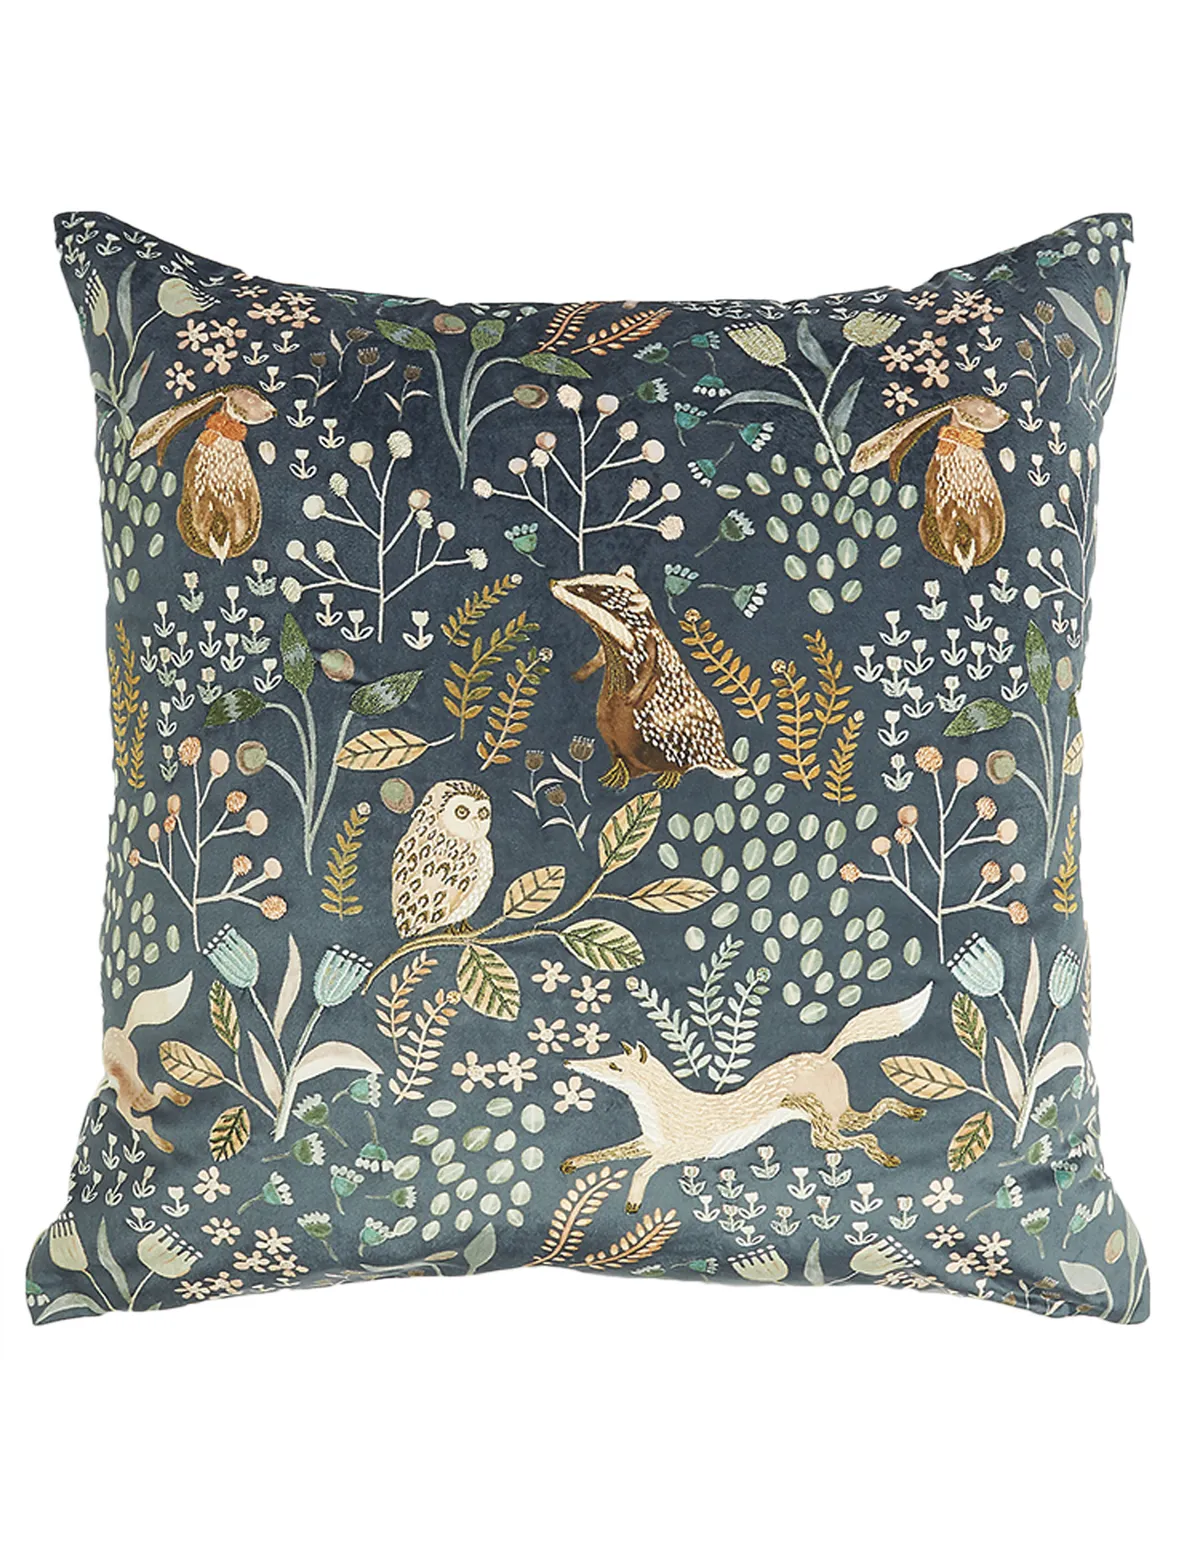 Woodland print embroidered cushion, £22.50, M&S